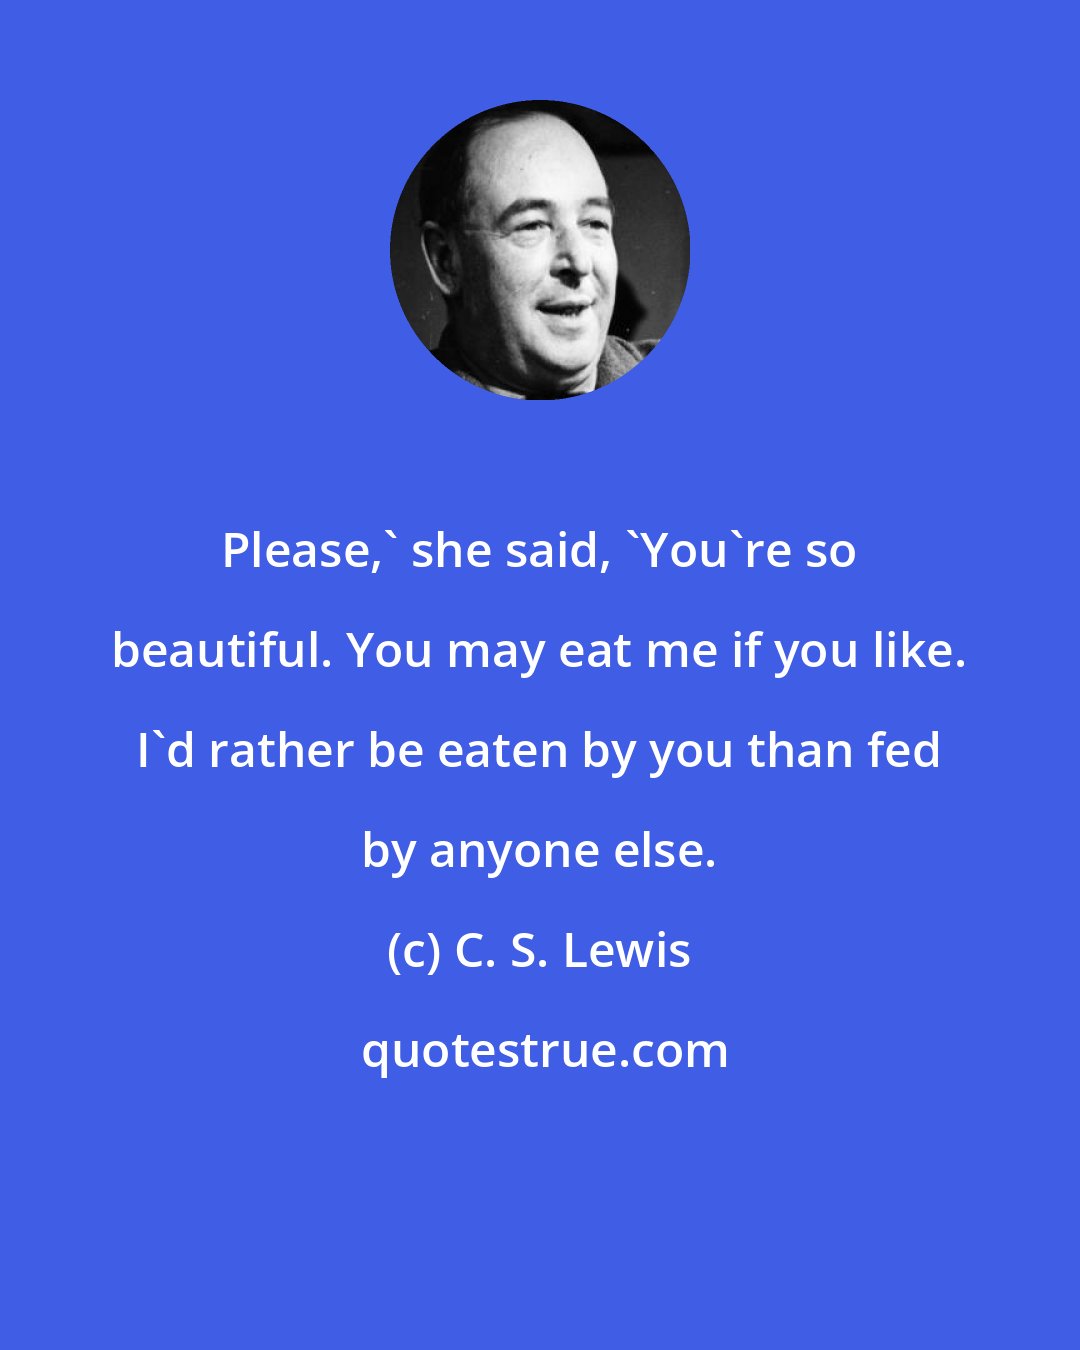 C. S. Lewis: Please,' she said, 'You're so beautiful. You may eat me if you like. I'd rather be eaten by you than fed by anyone else.